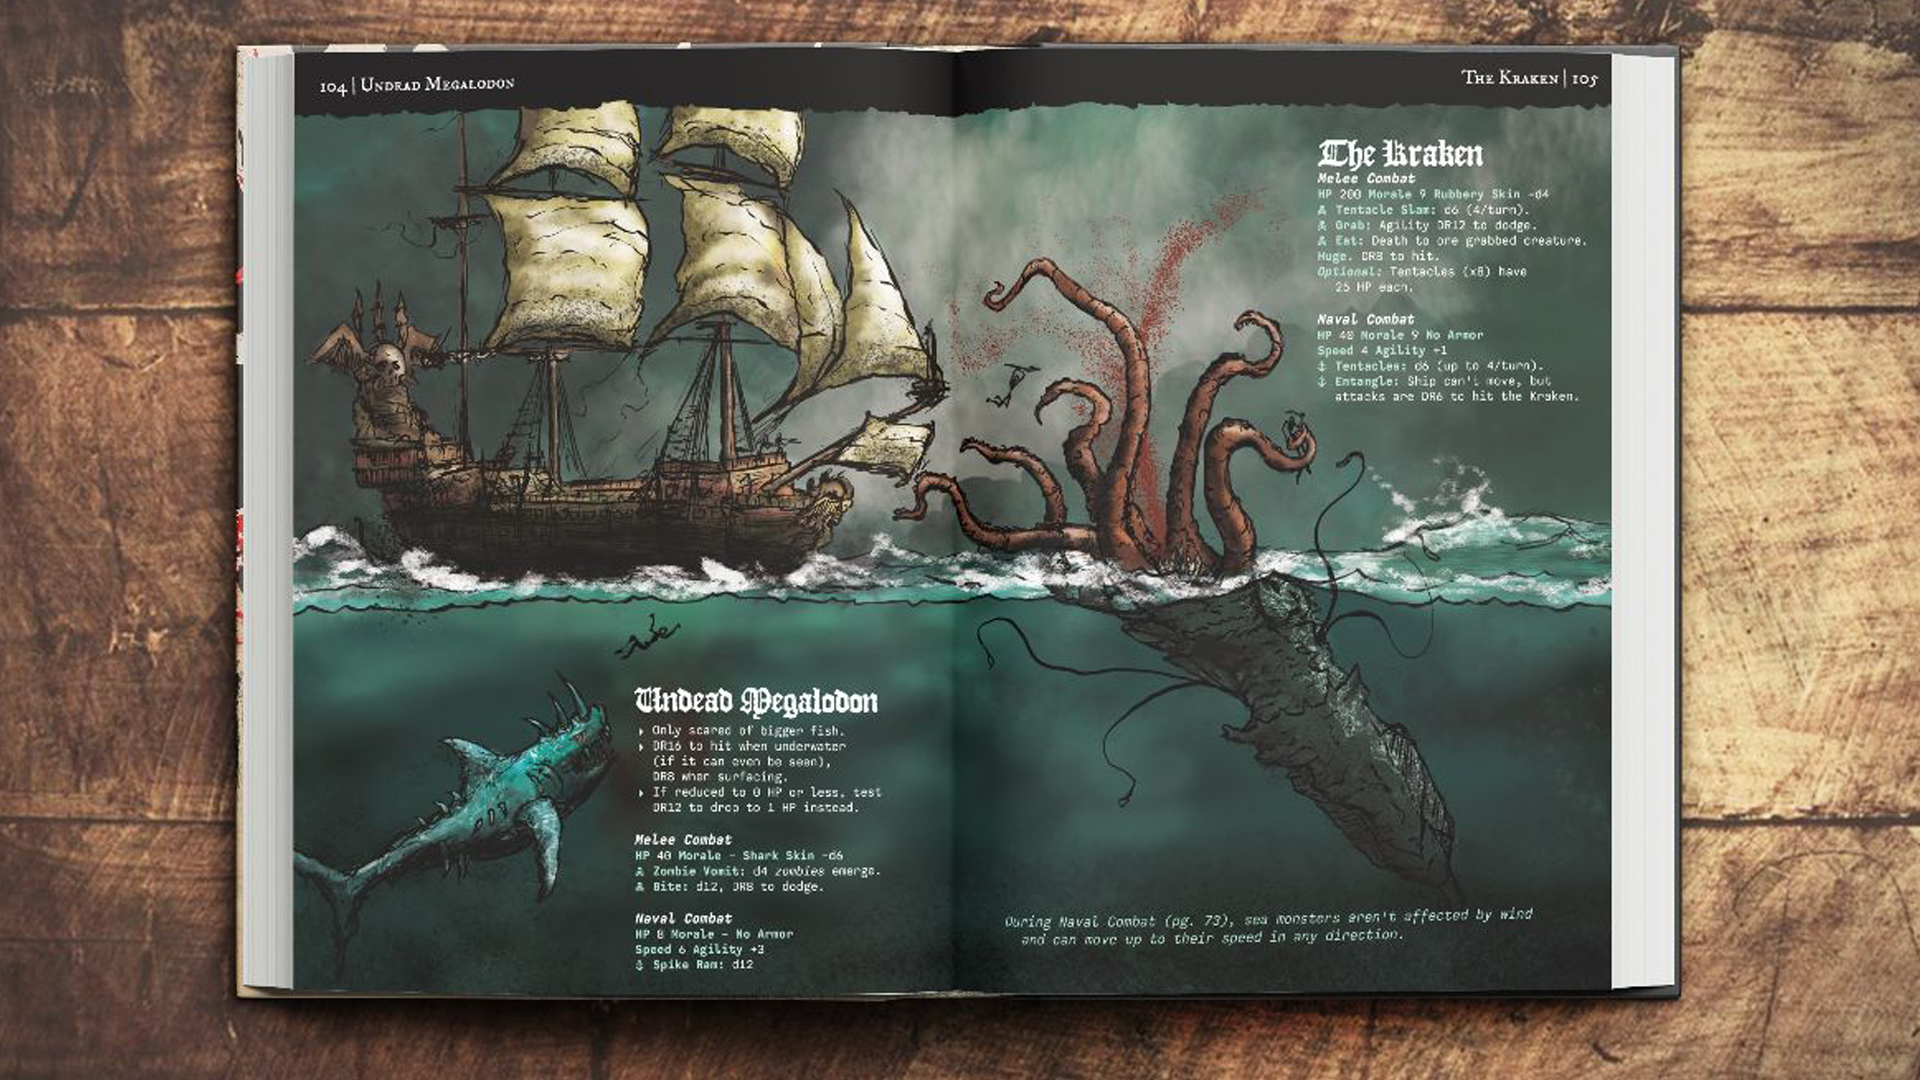 The spread of the book for the Pirate Borg RPG.